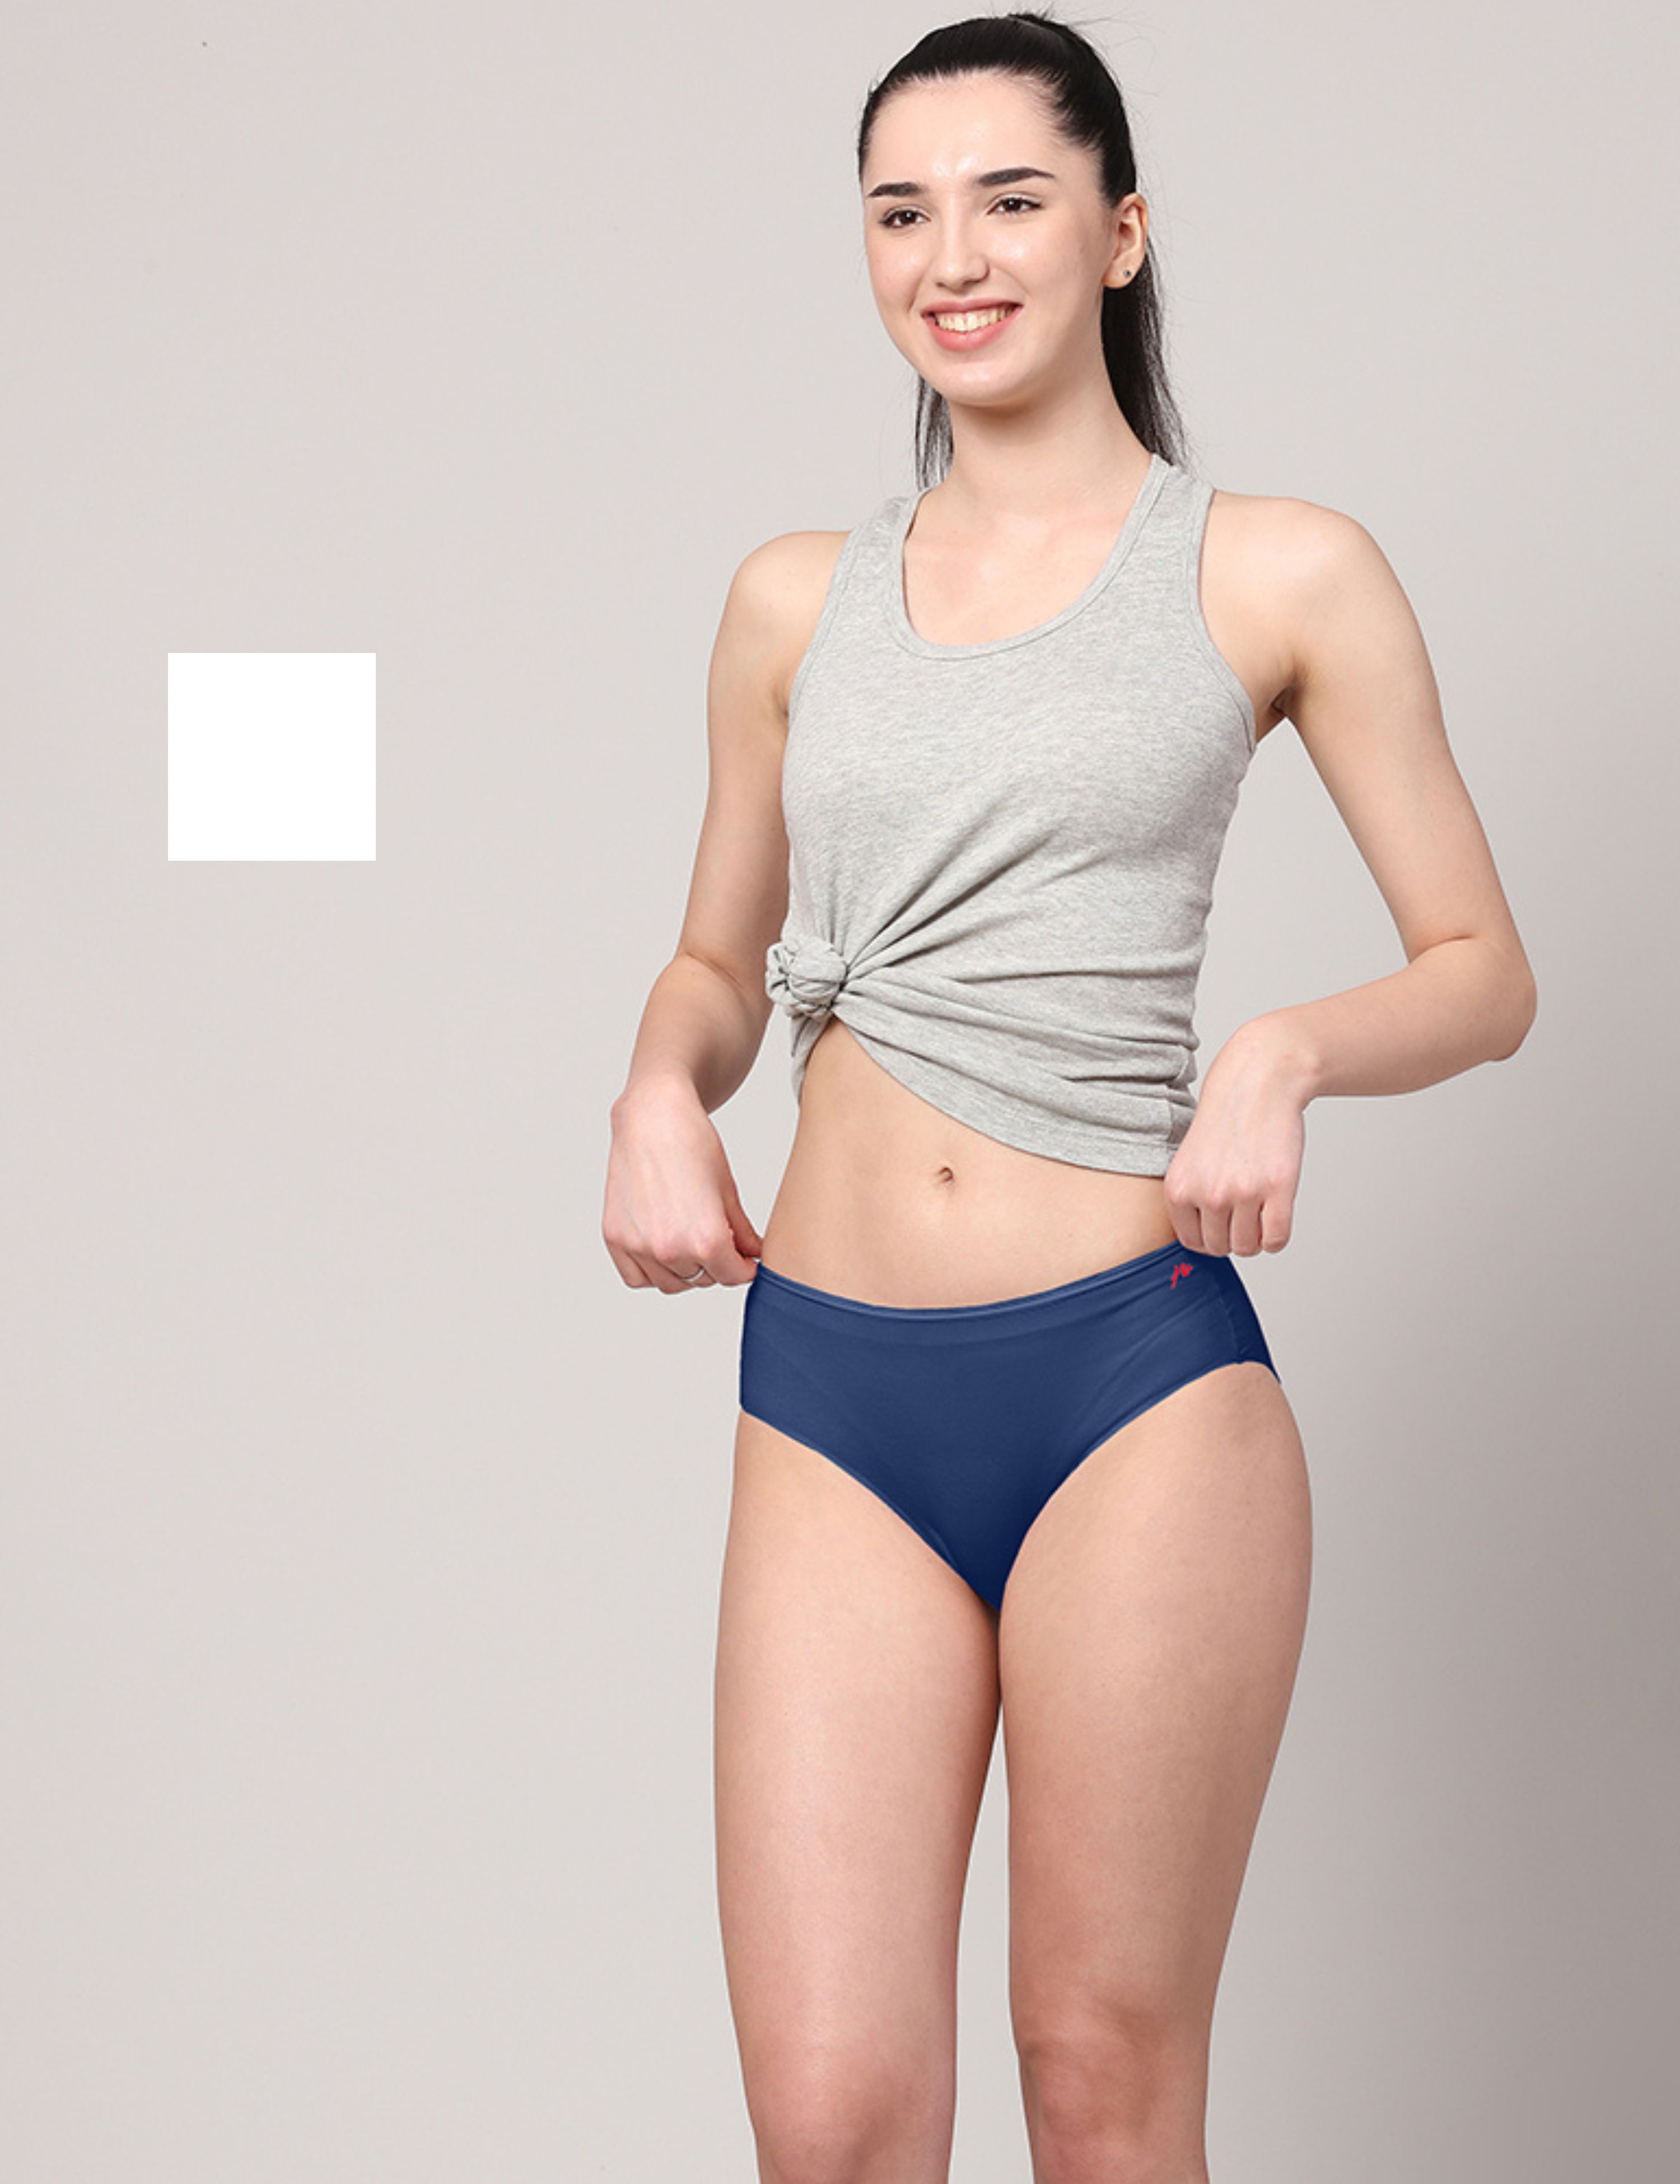 Against white colored background. Woman in underwear with slim